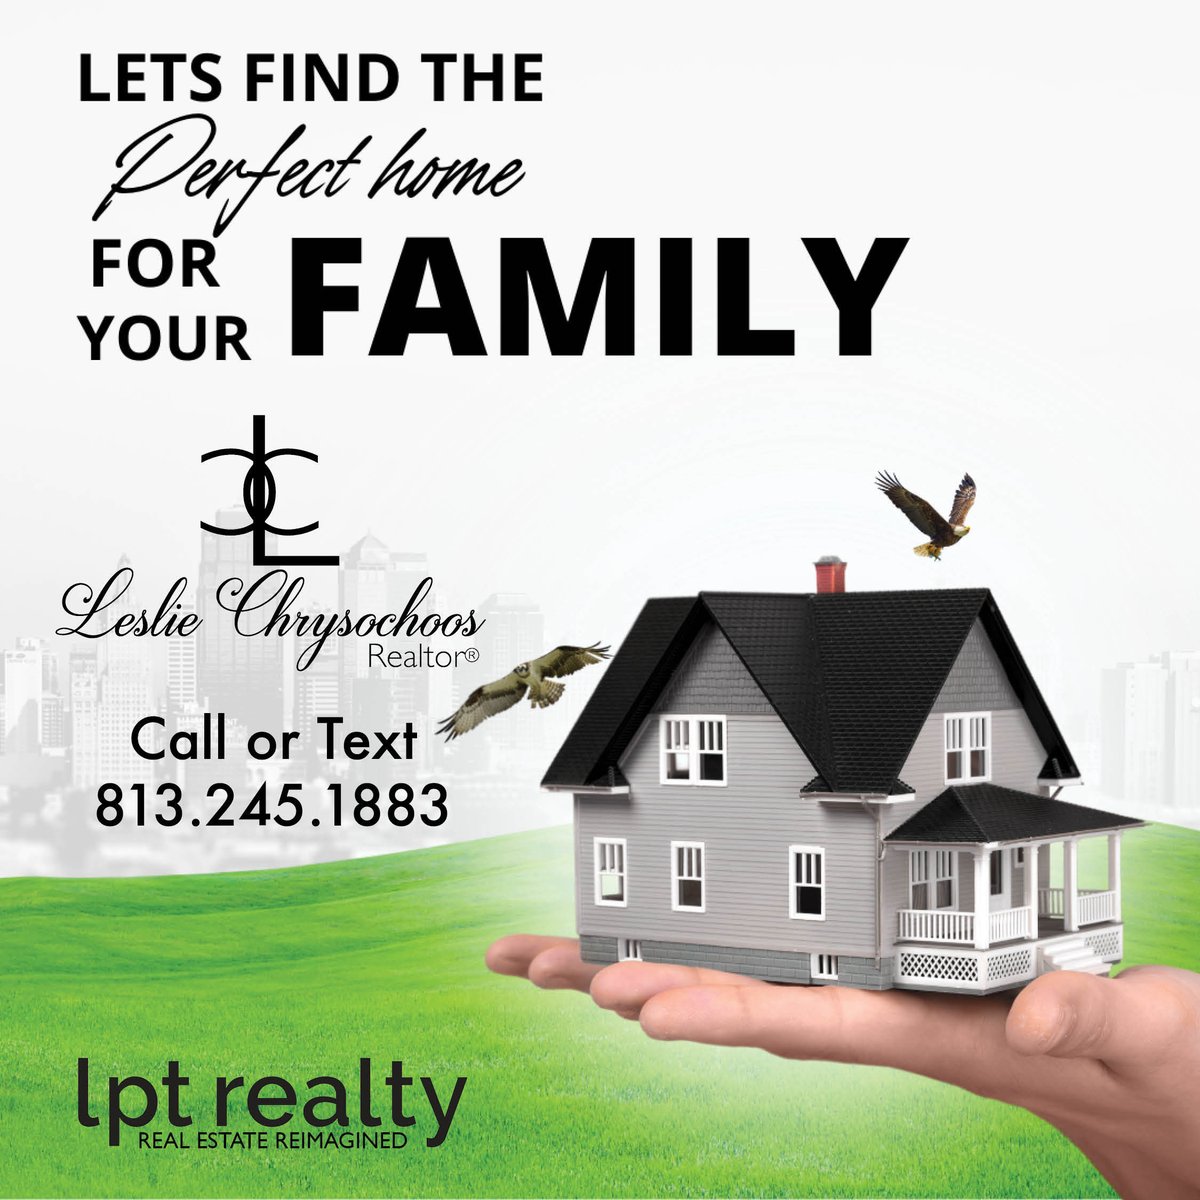 Let's find the perfect home for your family!
Text or call 813-245-1883 today.

#realestate #luxuryhomes #tampabayhomes #lptrealty #LptMagic #RealEstateReimagined #lptsocials #tampahomefinders #tamparealtor #813realtor #tampabay #realestateagent #relocatetoFlorida...